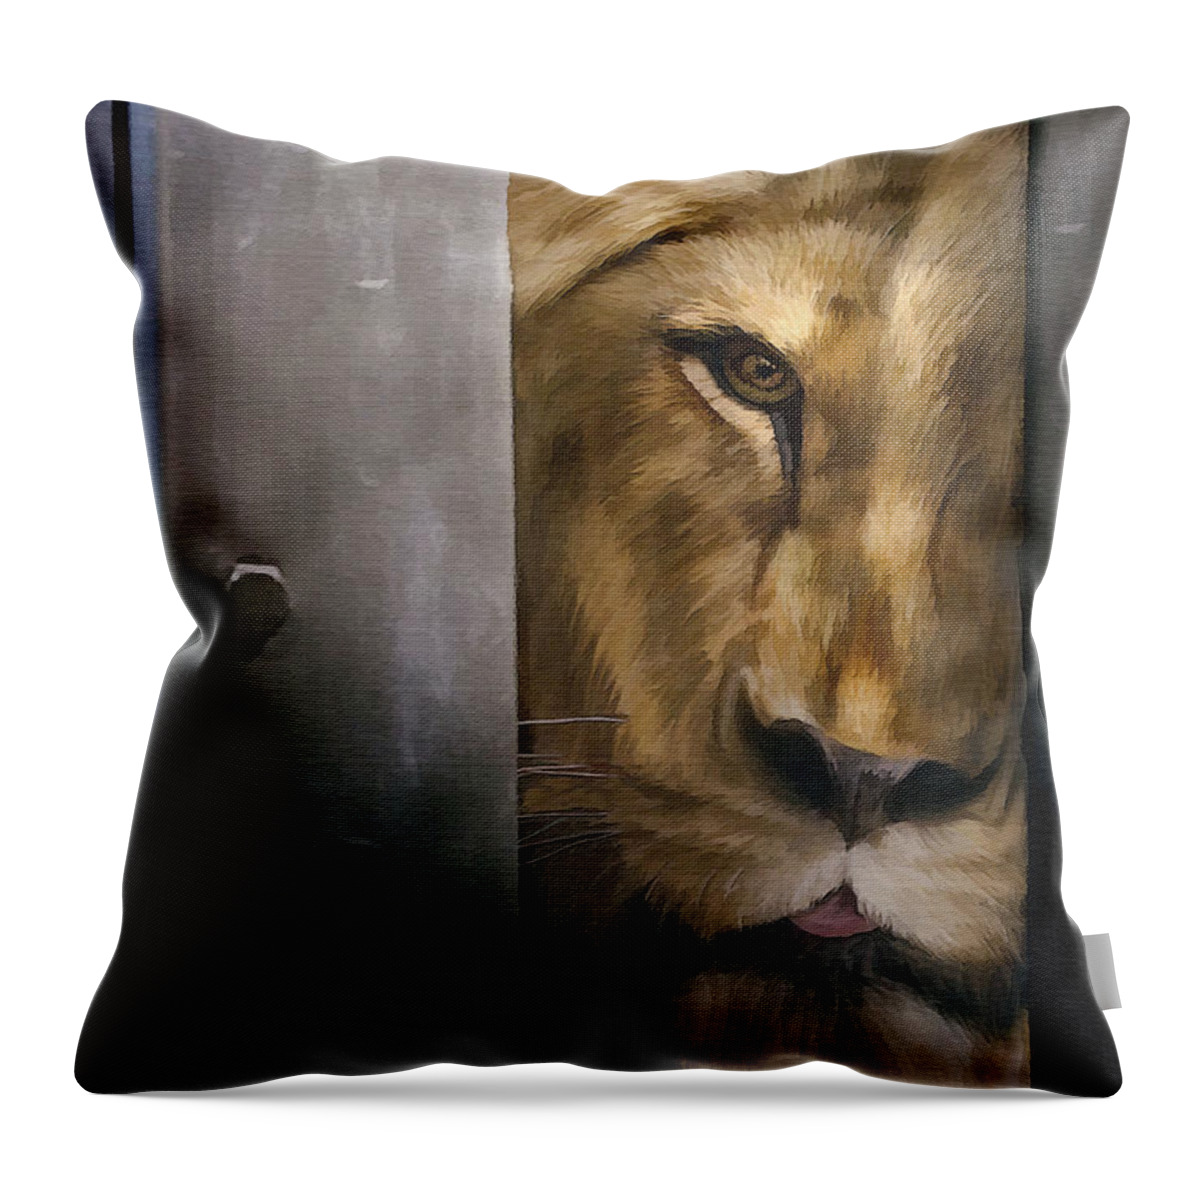 Lion Throw Pillow featuring the photograph Lion Eye by Sharon Foster